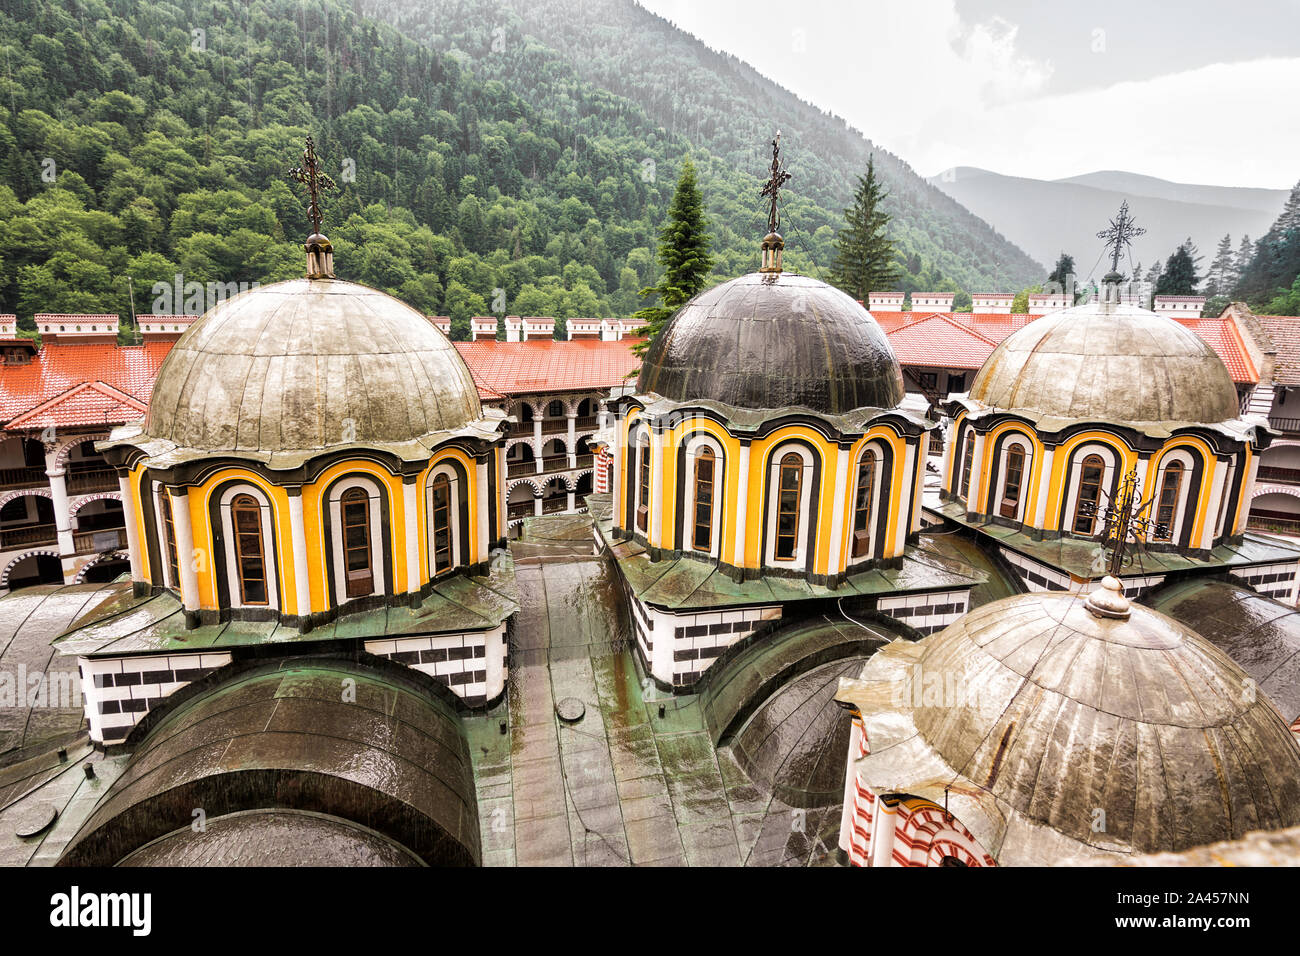 Domes of the Rila Monastery seen from above, Bulgaria Stock Photo